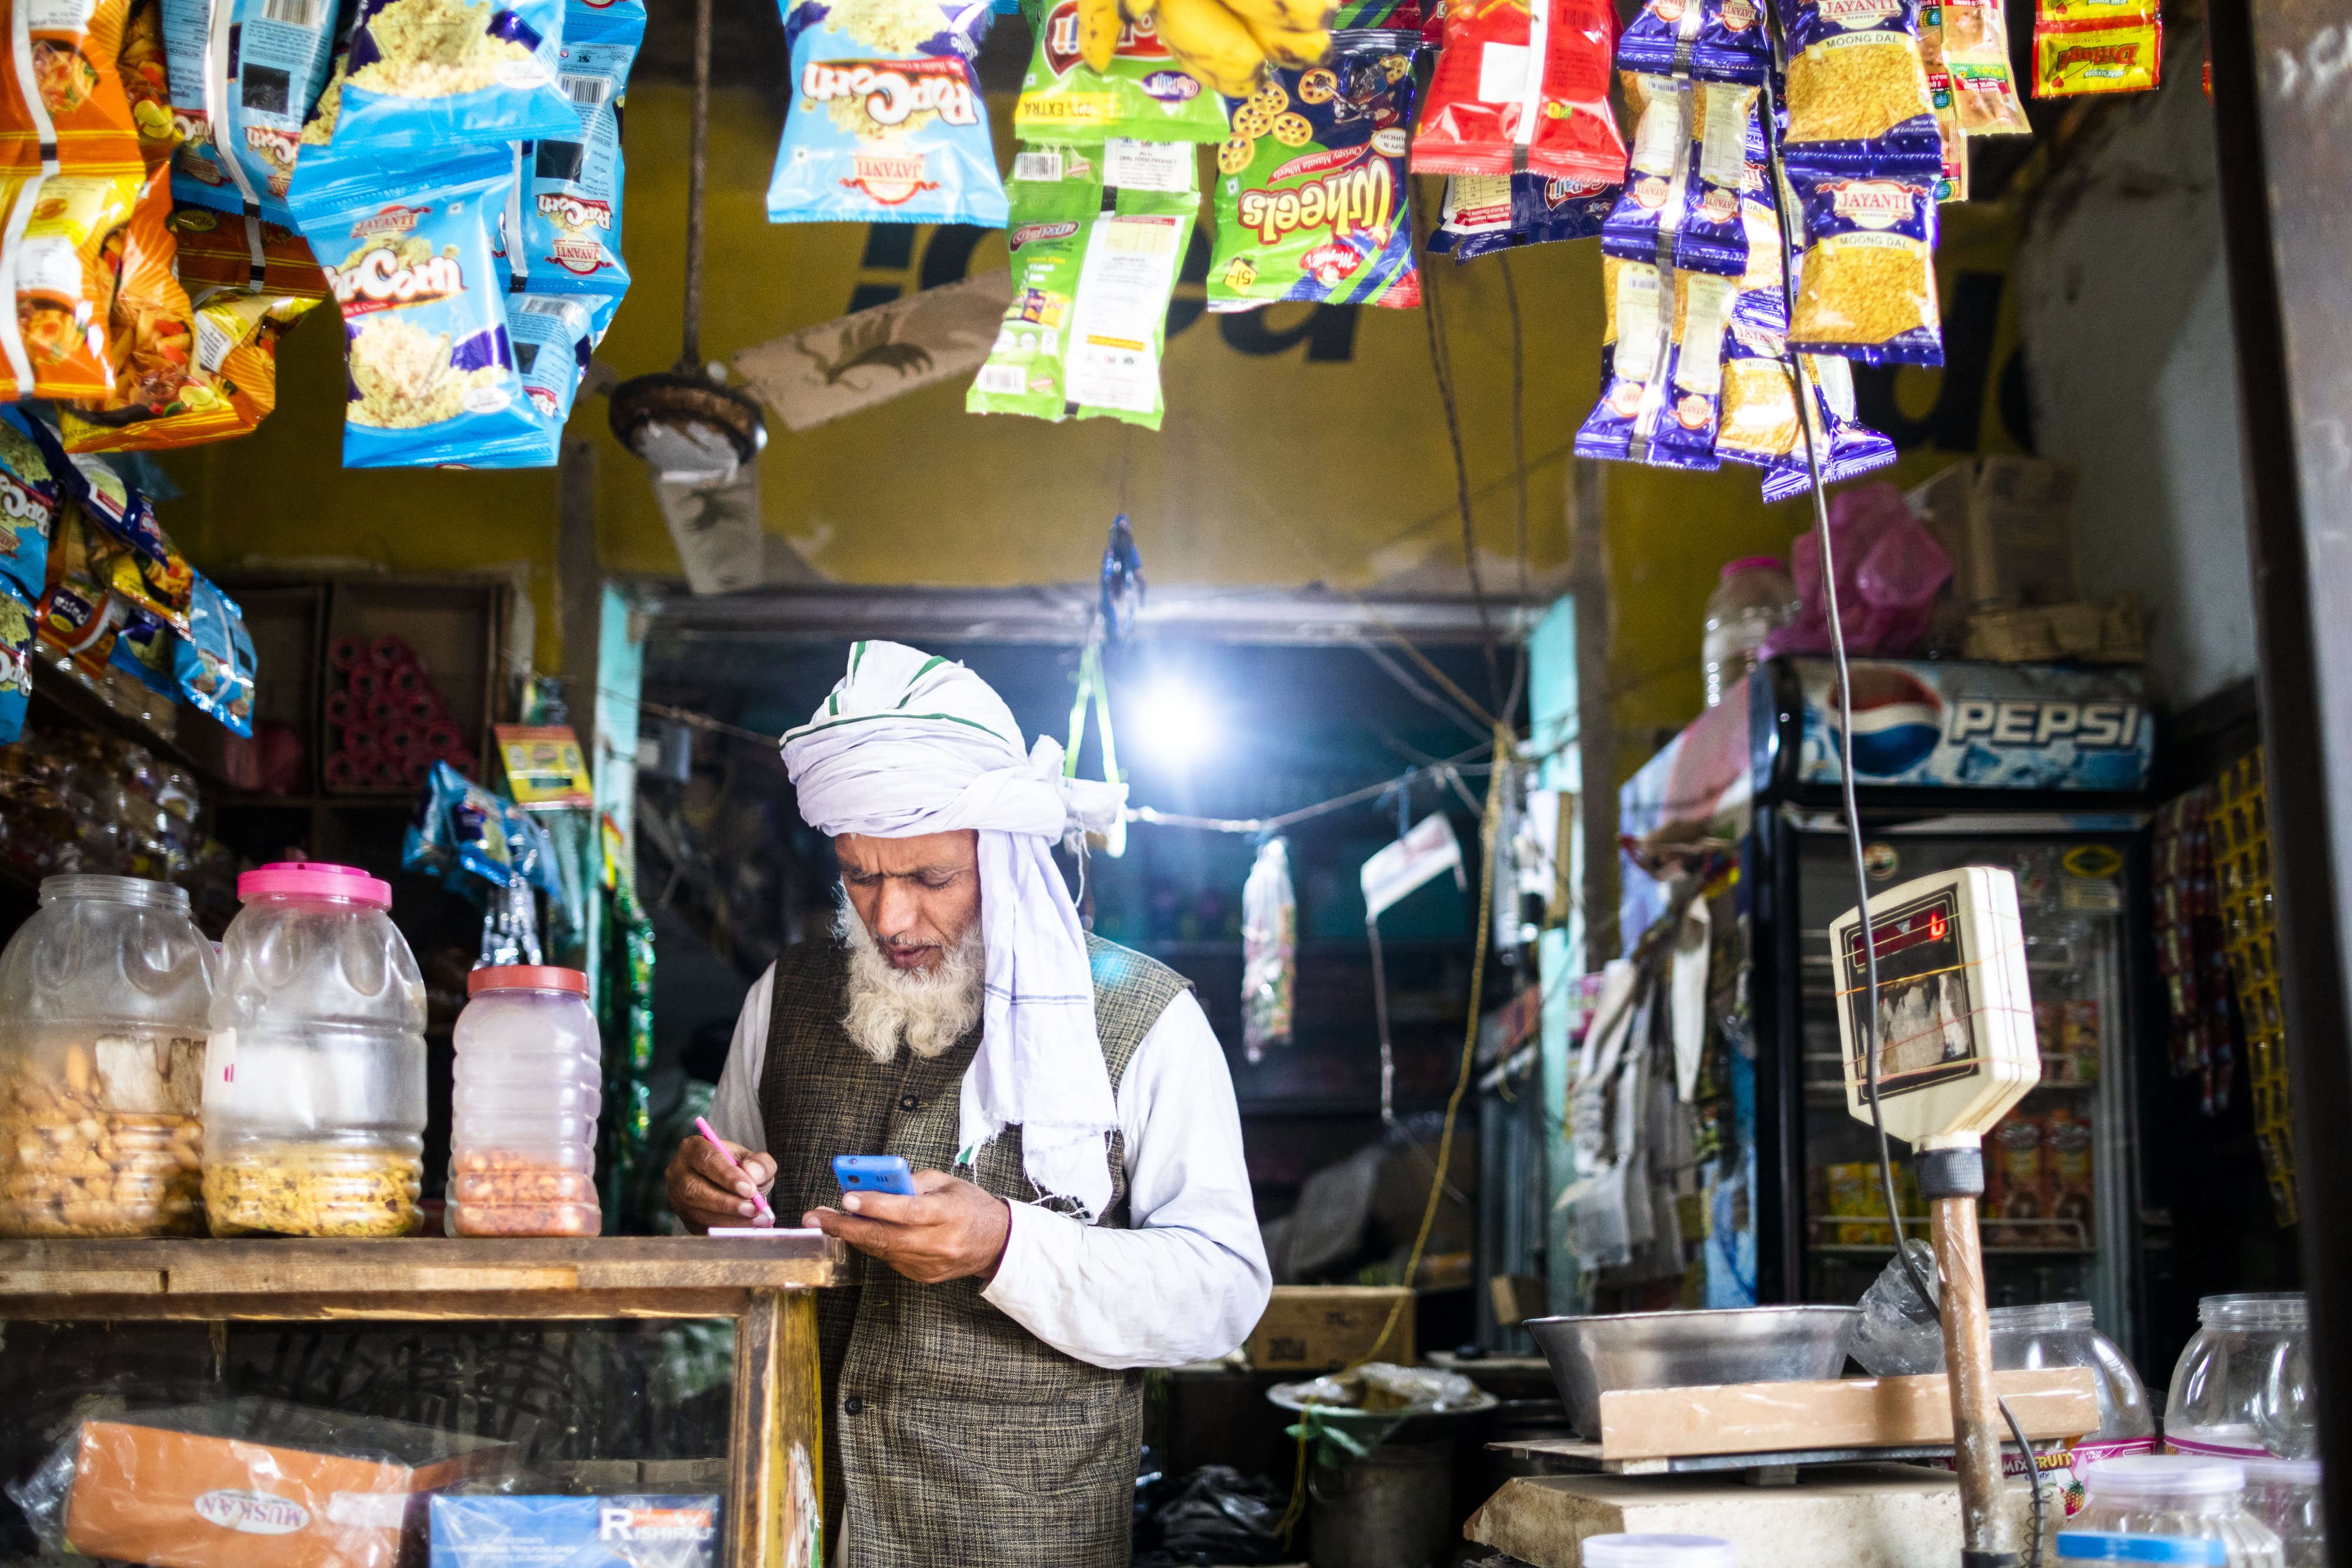 e-Payments are now easier as internet connectivity is reaching rural and remote areas